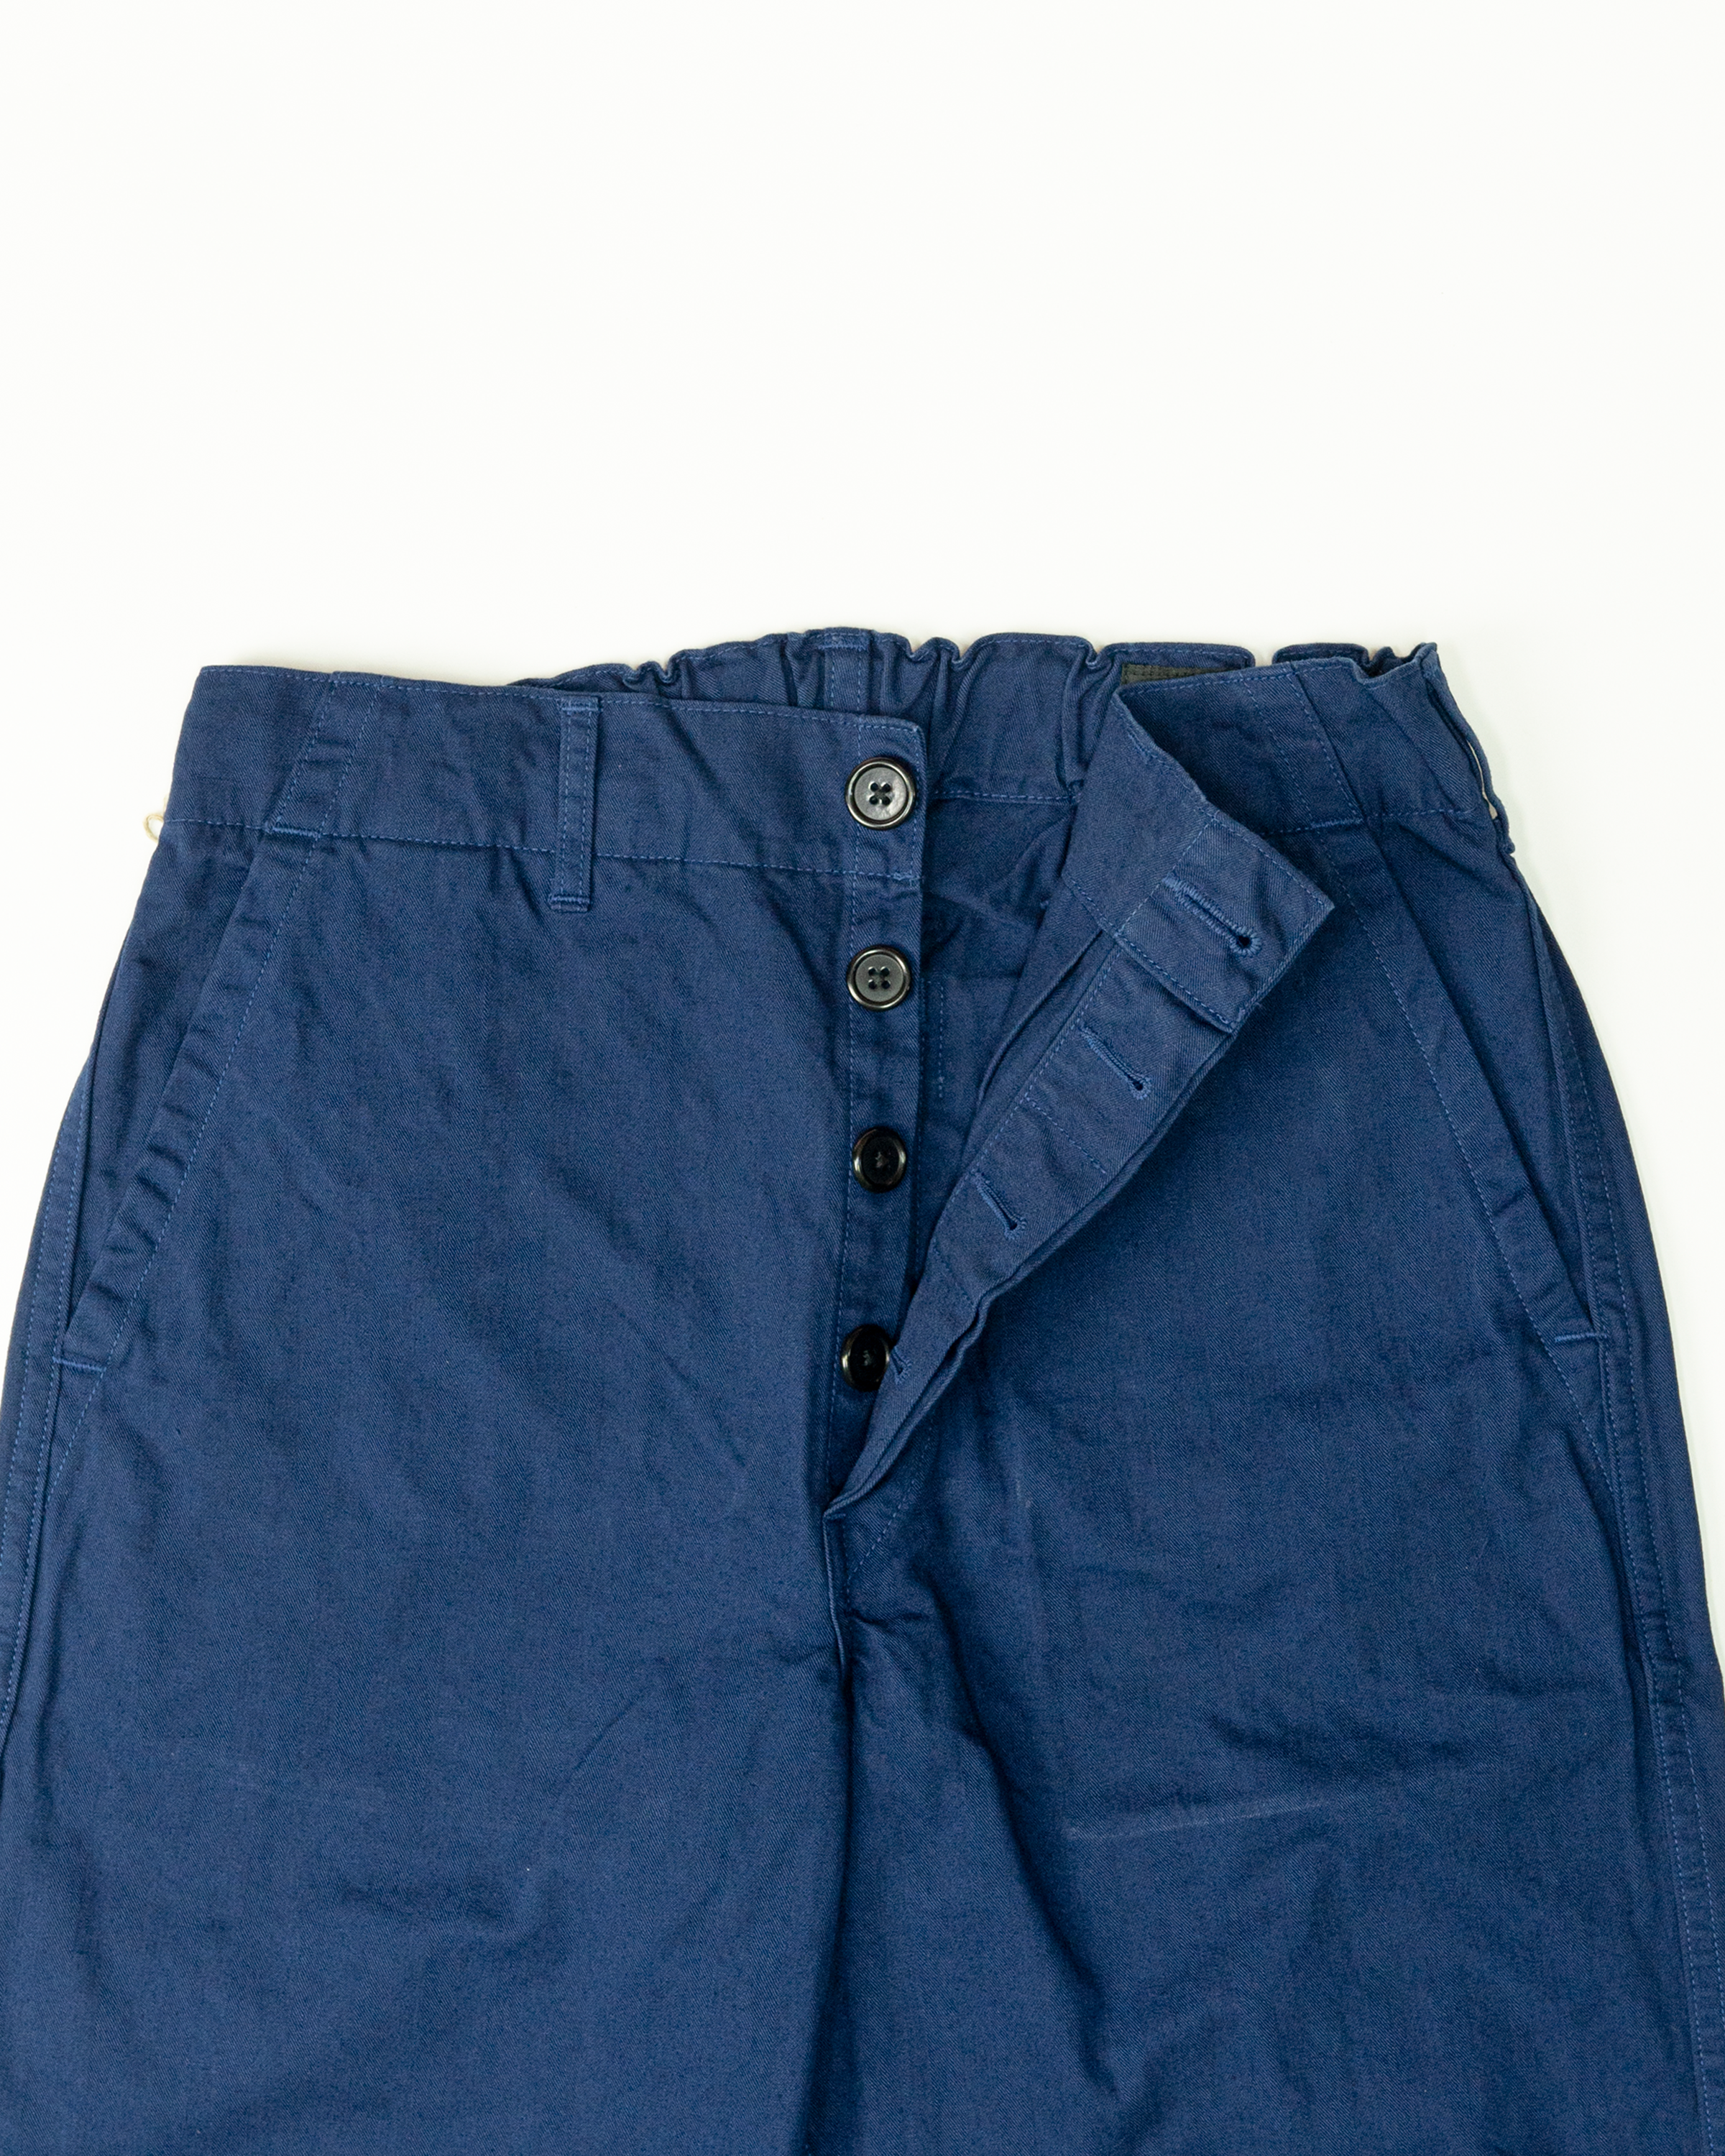 French Work Pants | 03-5000-03